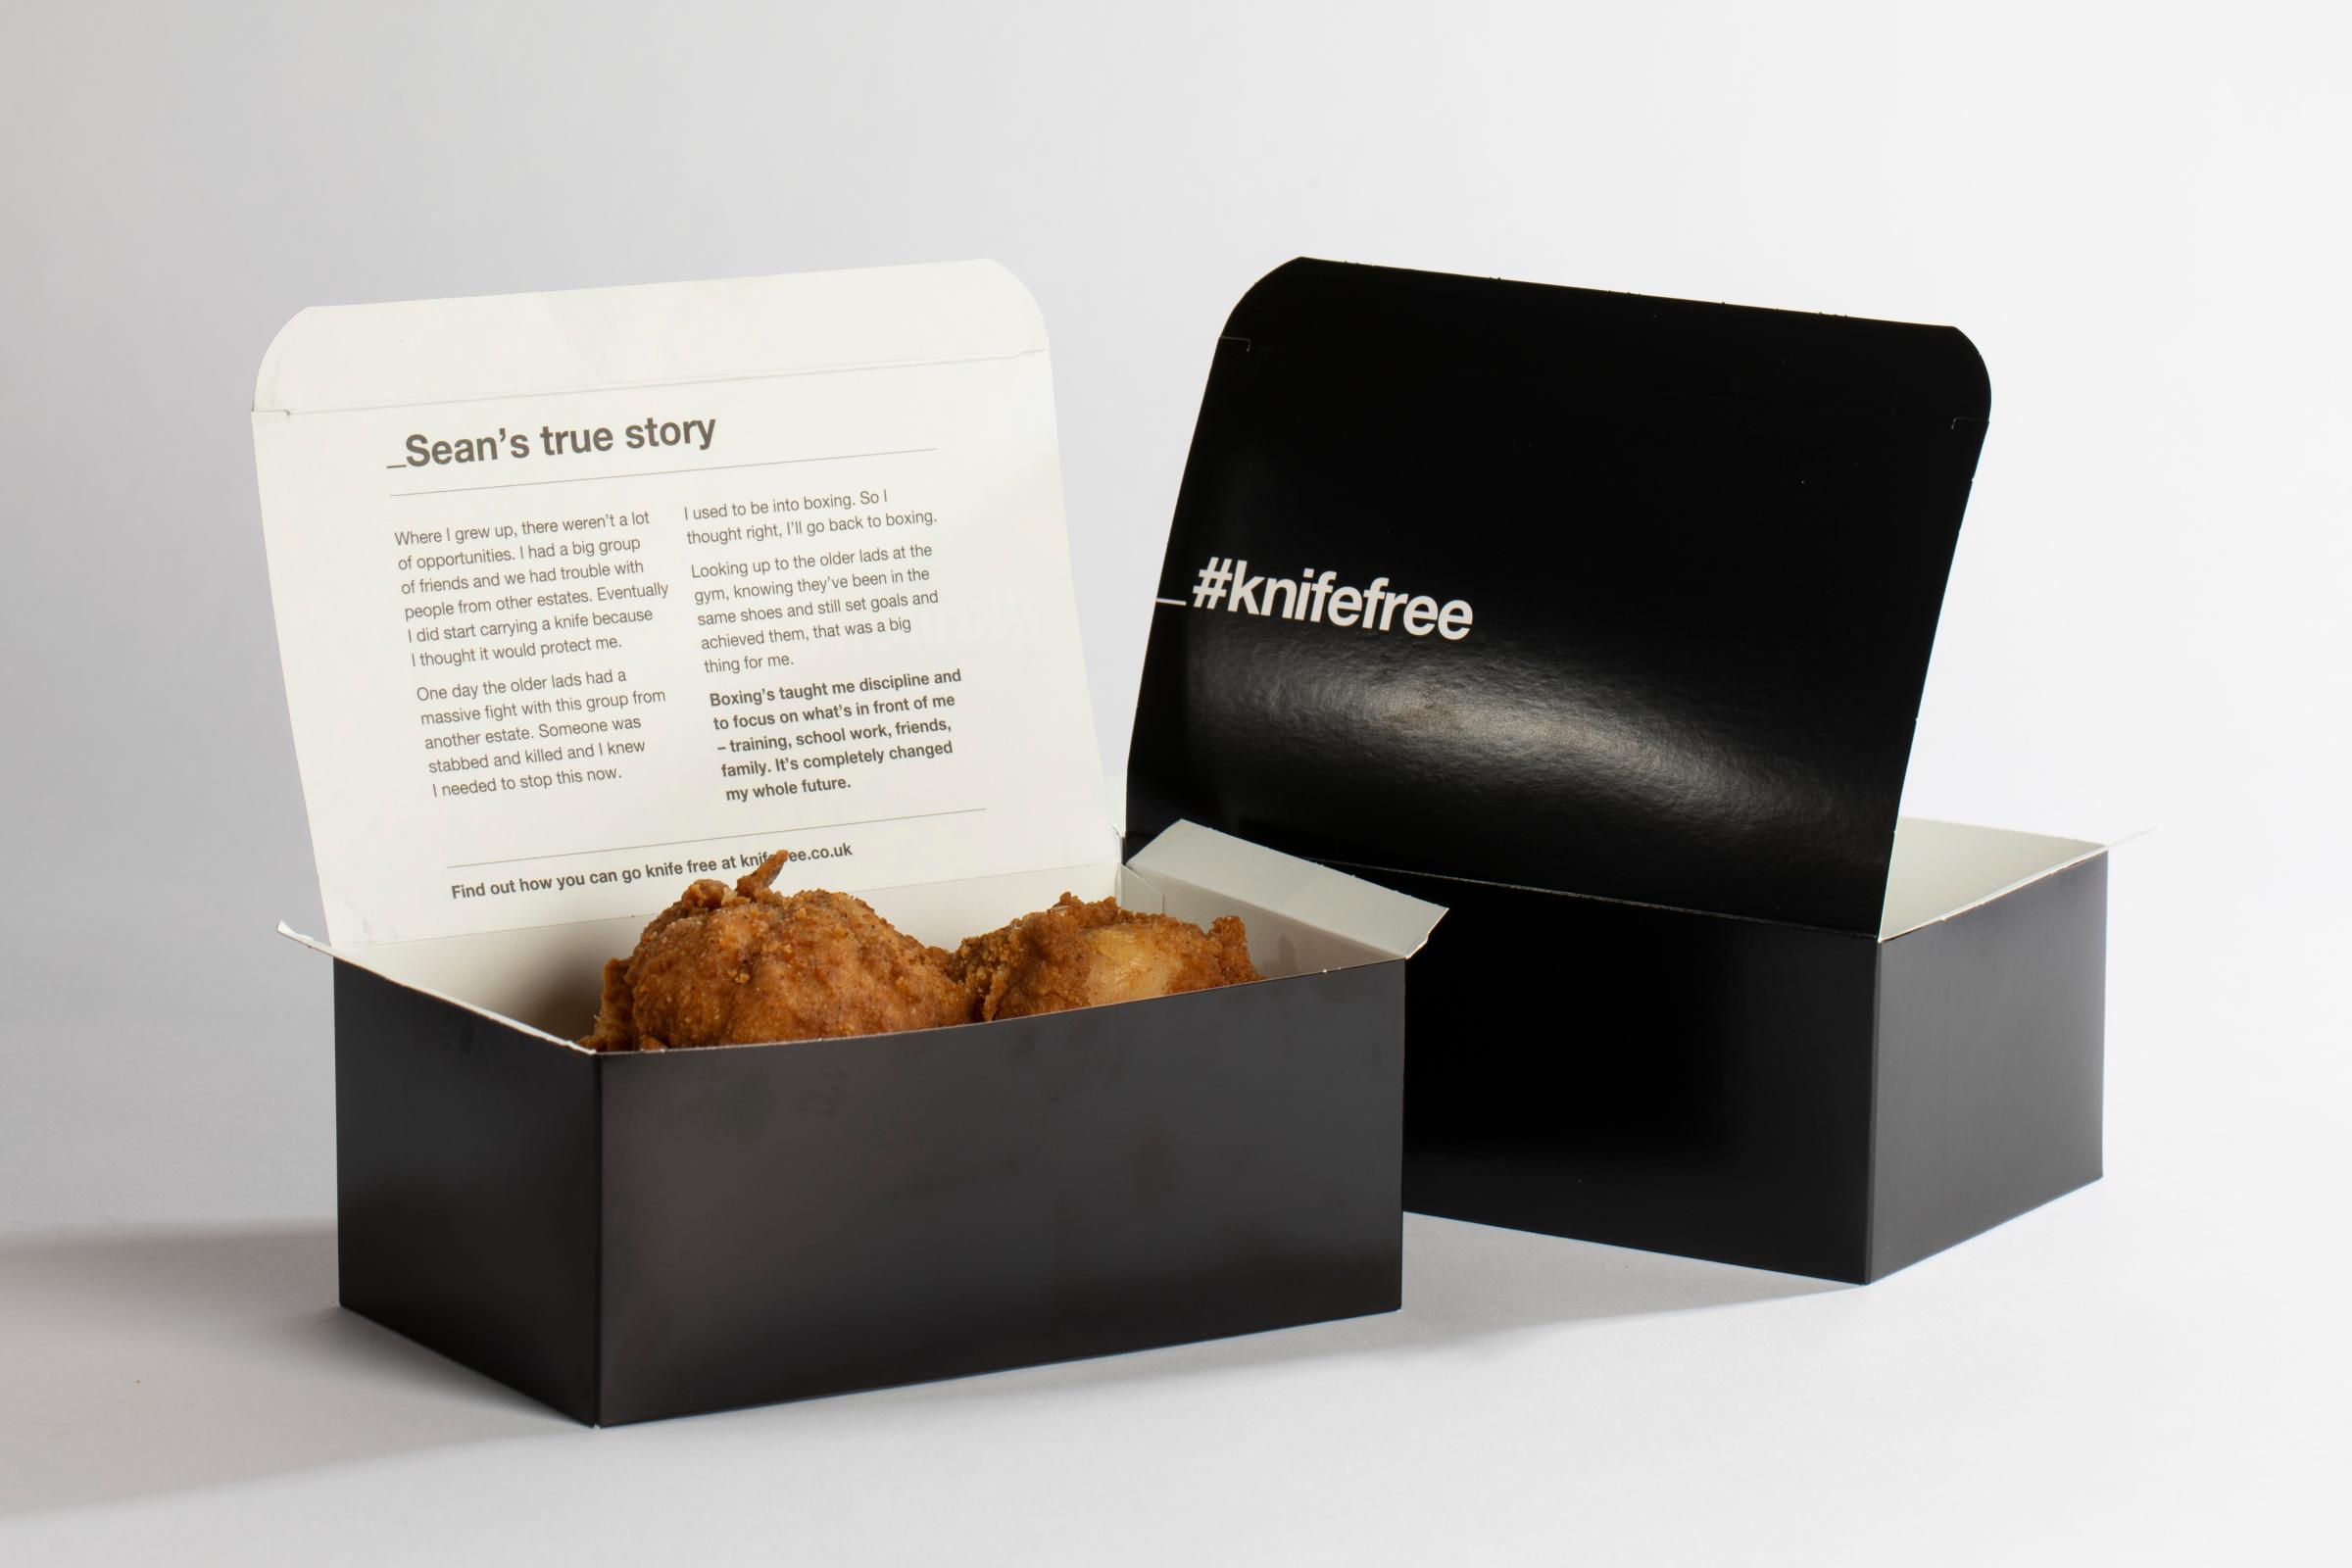 Home Office Use Messaging In Chicken Shop Boxes To Combat Knife Crime